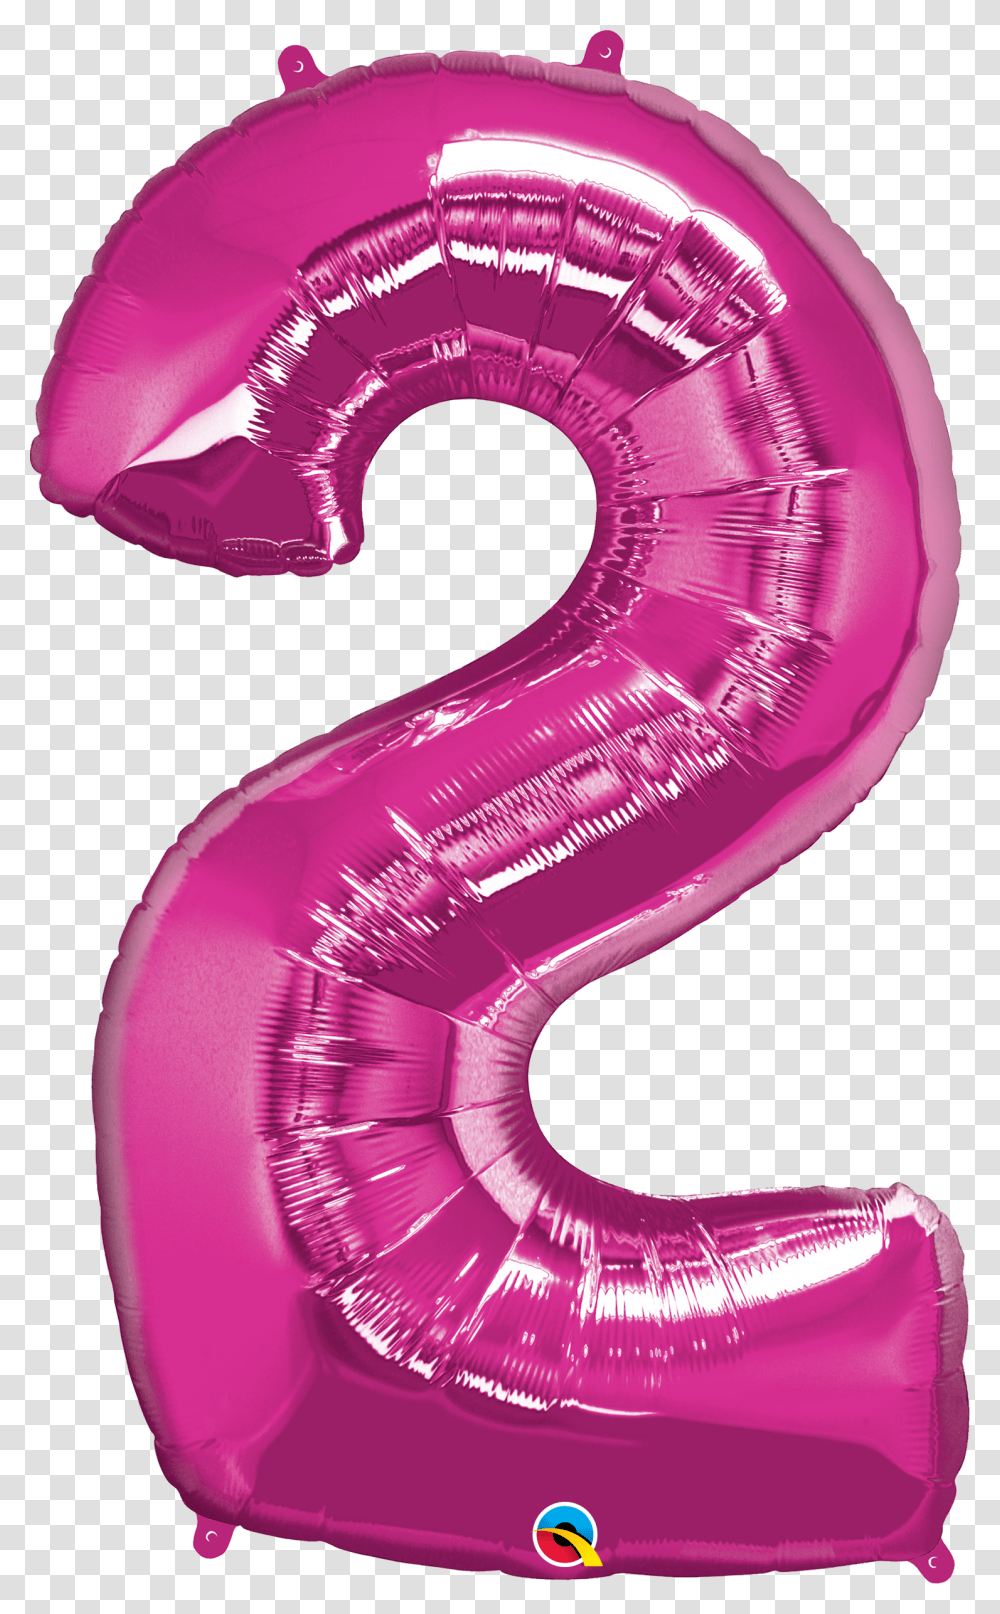 Foil Balloon Number 2 Magenta Amp Weight Qualatex Number Balloons Blue, Purple, Inflatable Transparent Png